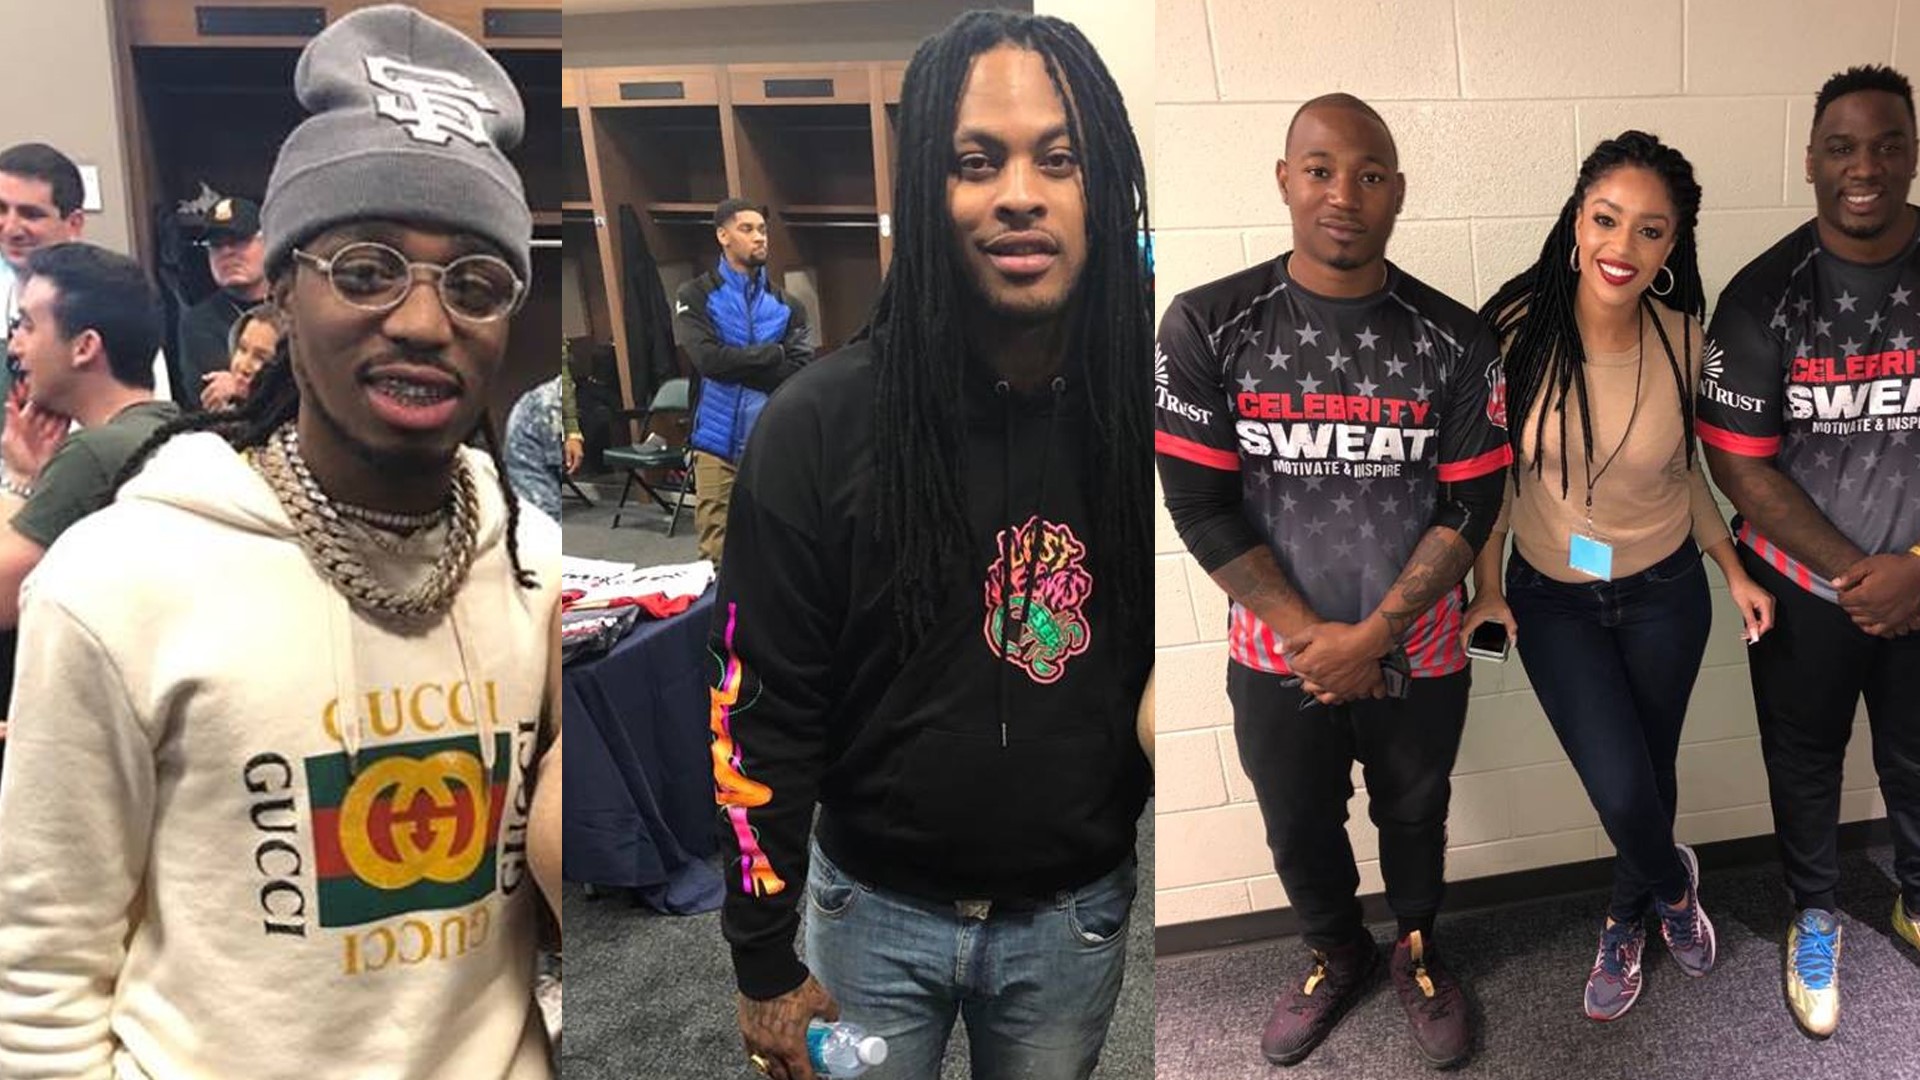 Quavo and Waka are reppin the A, but lets just say Waka had to sit this one out in a hilarious way.